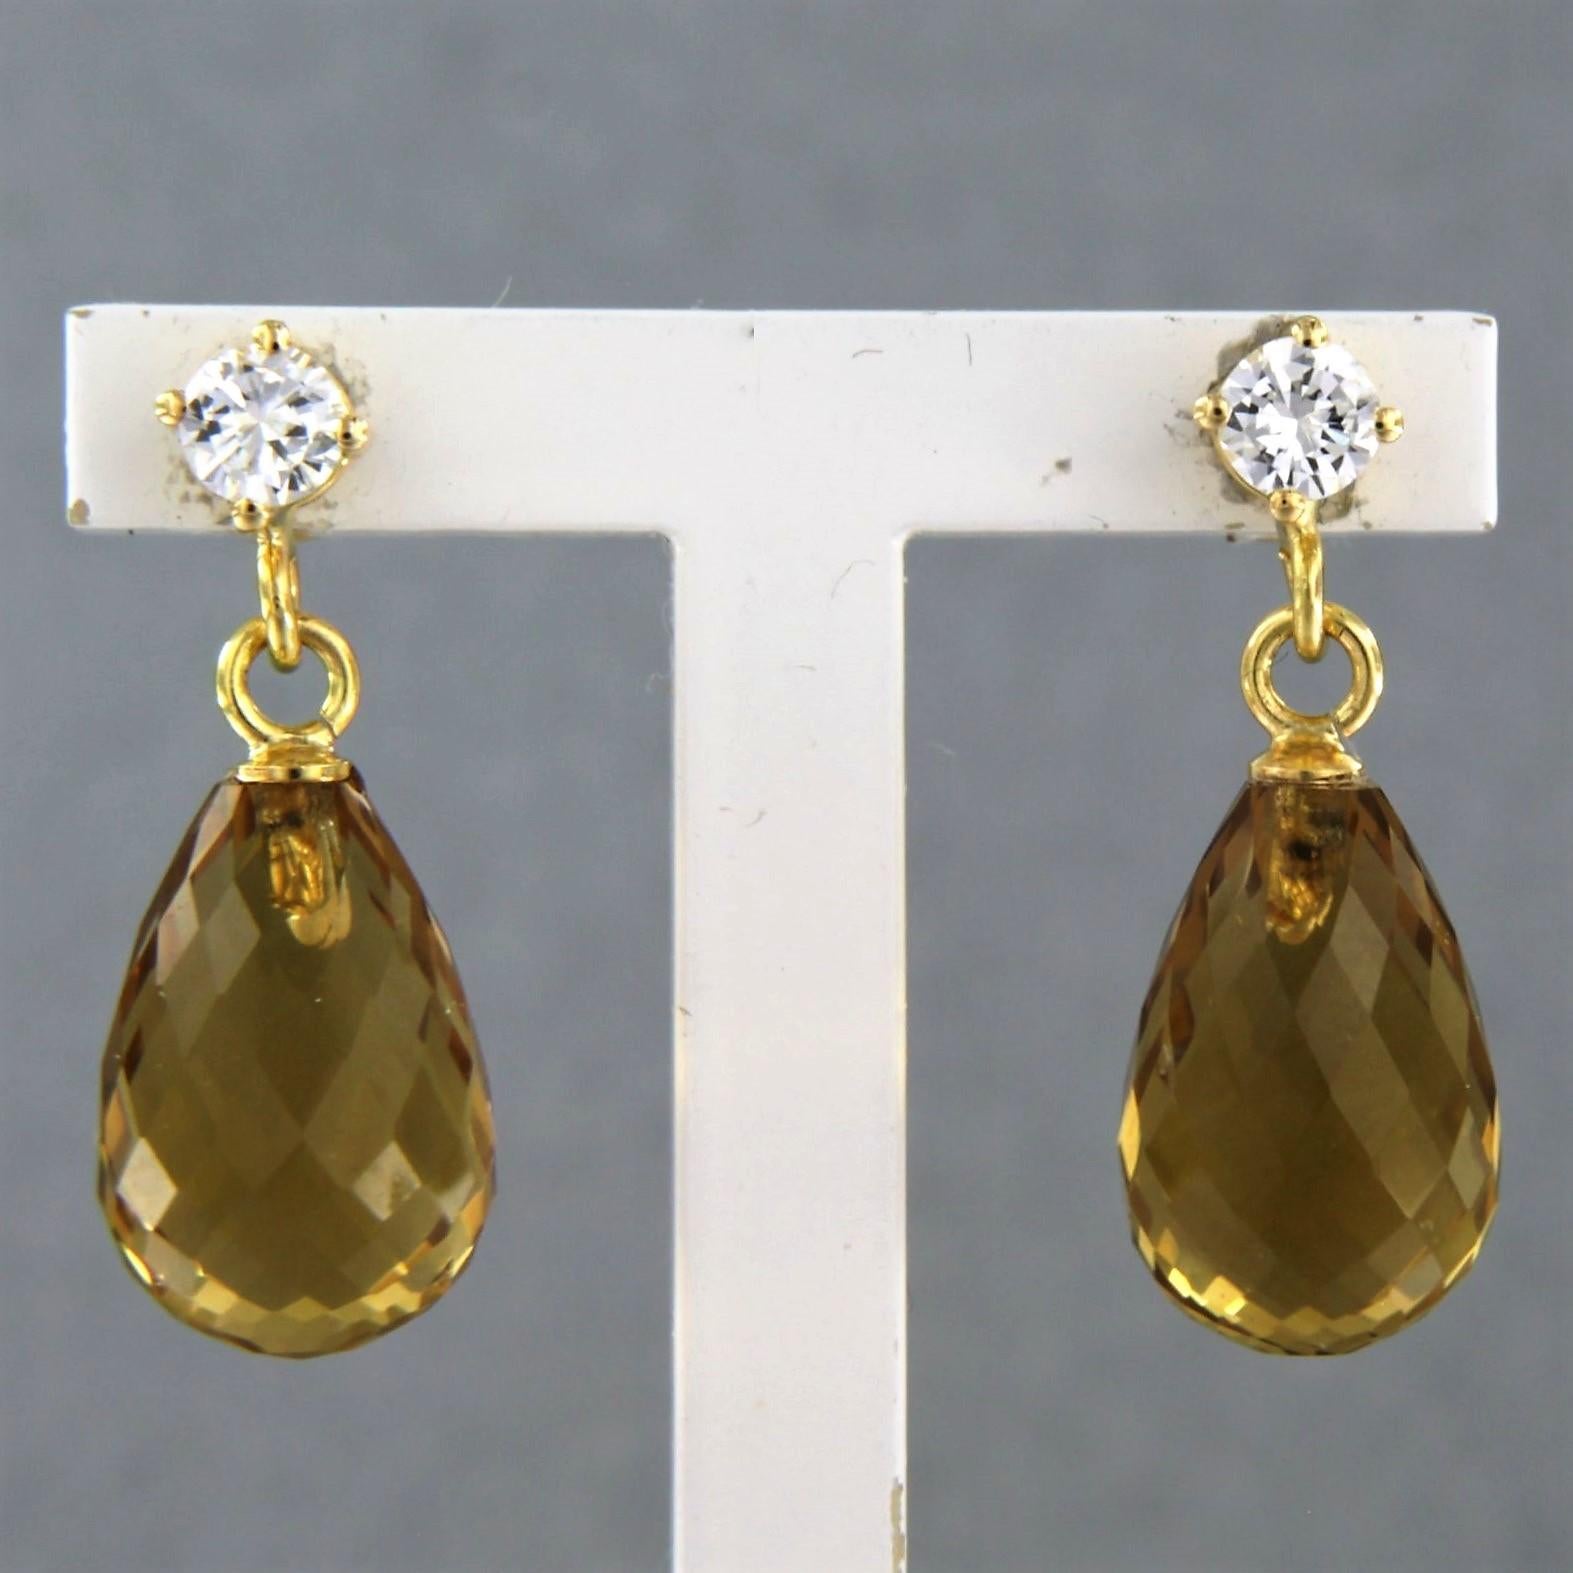 18k yellow gold earrings with yellow citrine and brilliant cut diamonds 0.30ct - F/G - VS/SI

detailed description:

the size of the earrings is 2.2 cm high and 0.8 cm wide

Total weight 3.9 grams

set with

- 2 x 12 mm x 8 mm briolette cut yellow